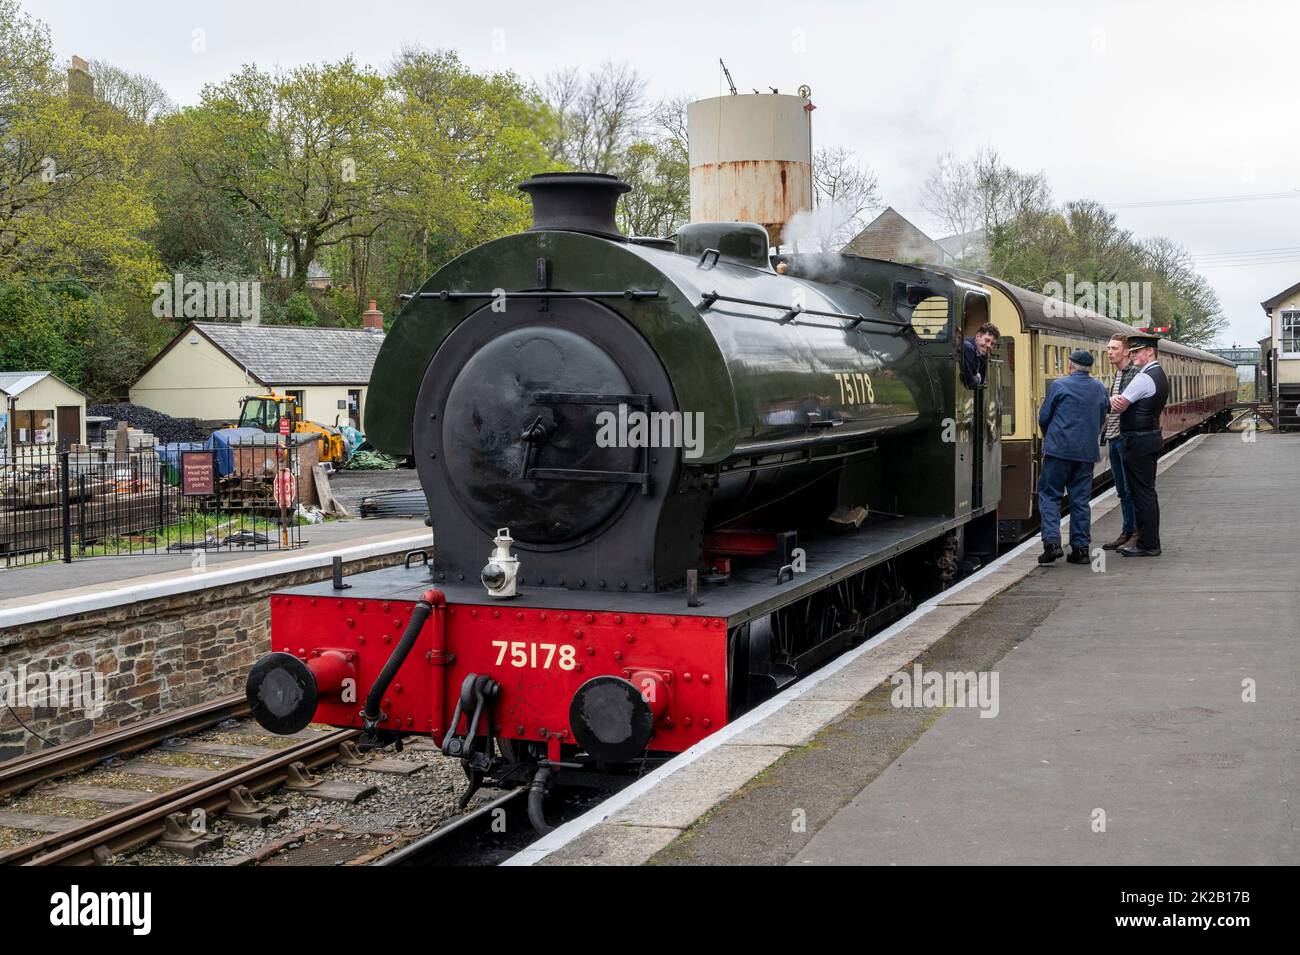 The Bodmin and Wenford heritage rail with stations and staff dressed for the period, organising steam train rides for the public. Cornwall, UK Stock Photo